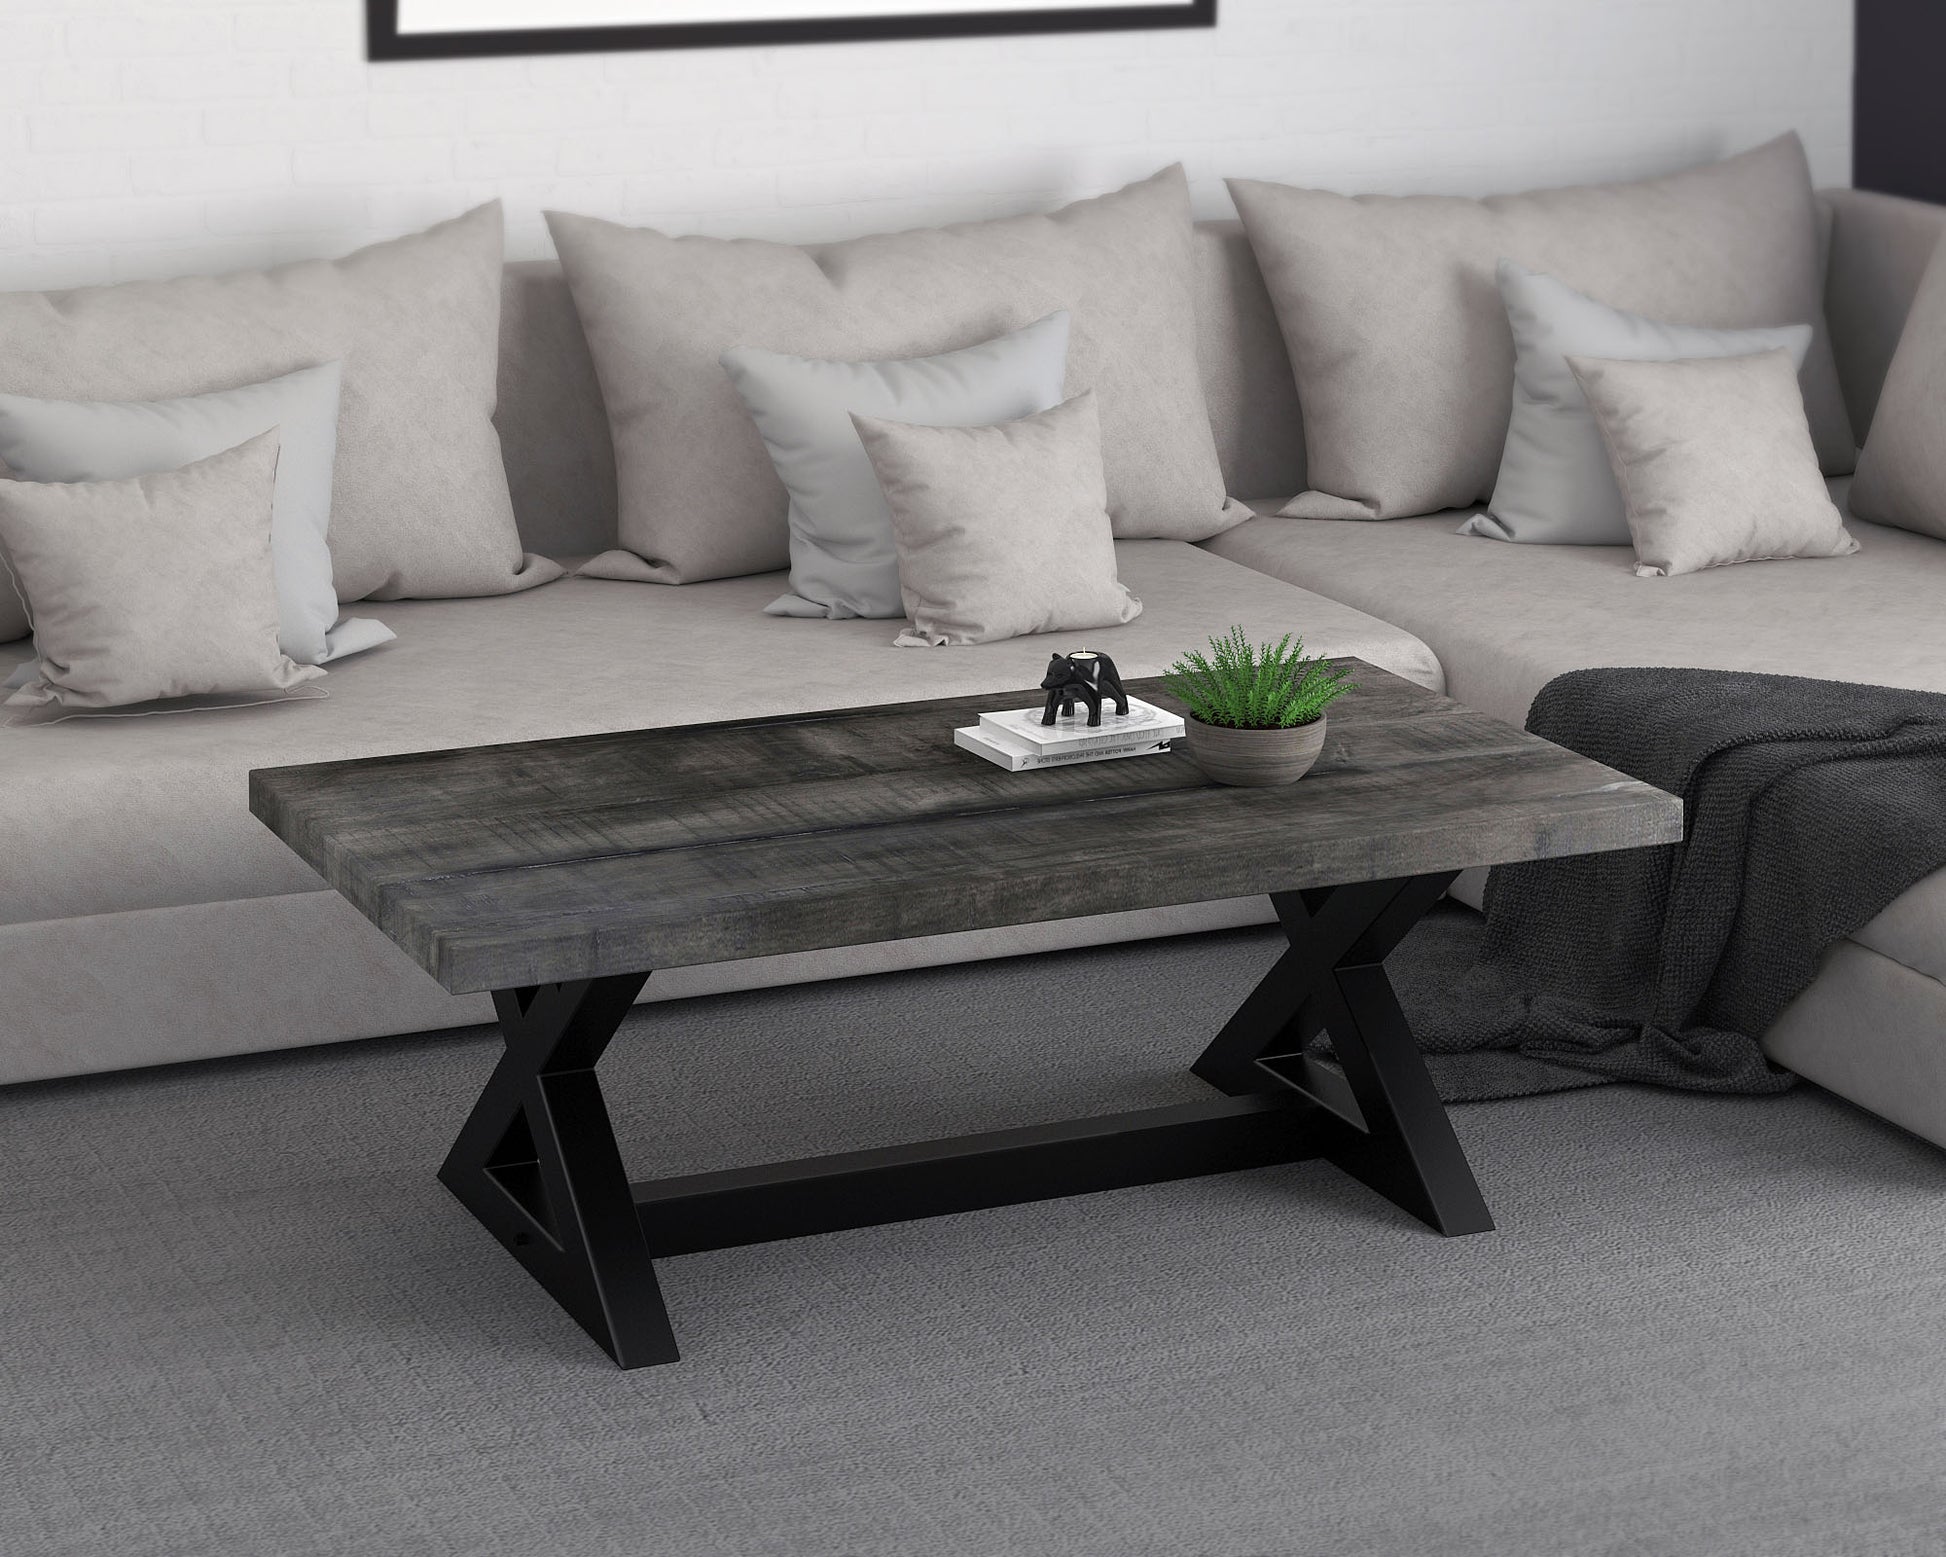 Zax Coffee Table in Distressed Grey - Dreamart Gallery